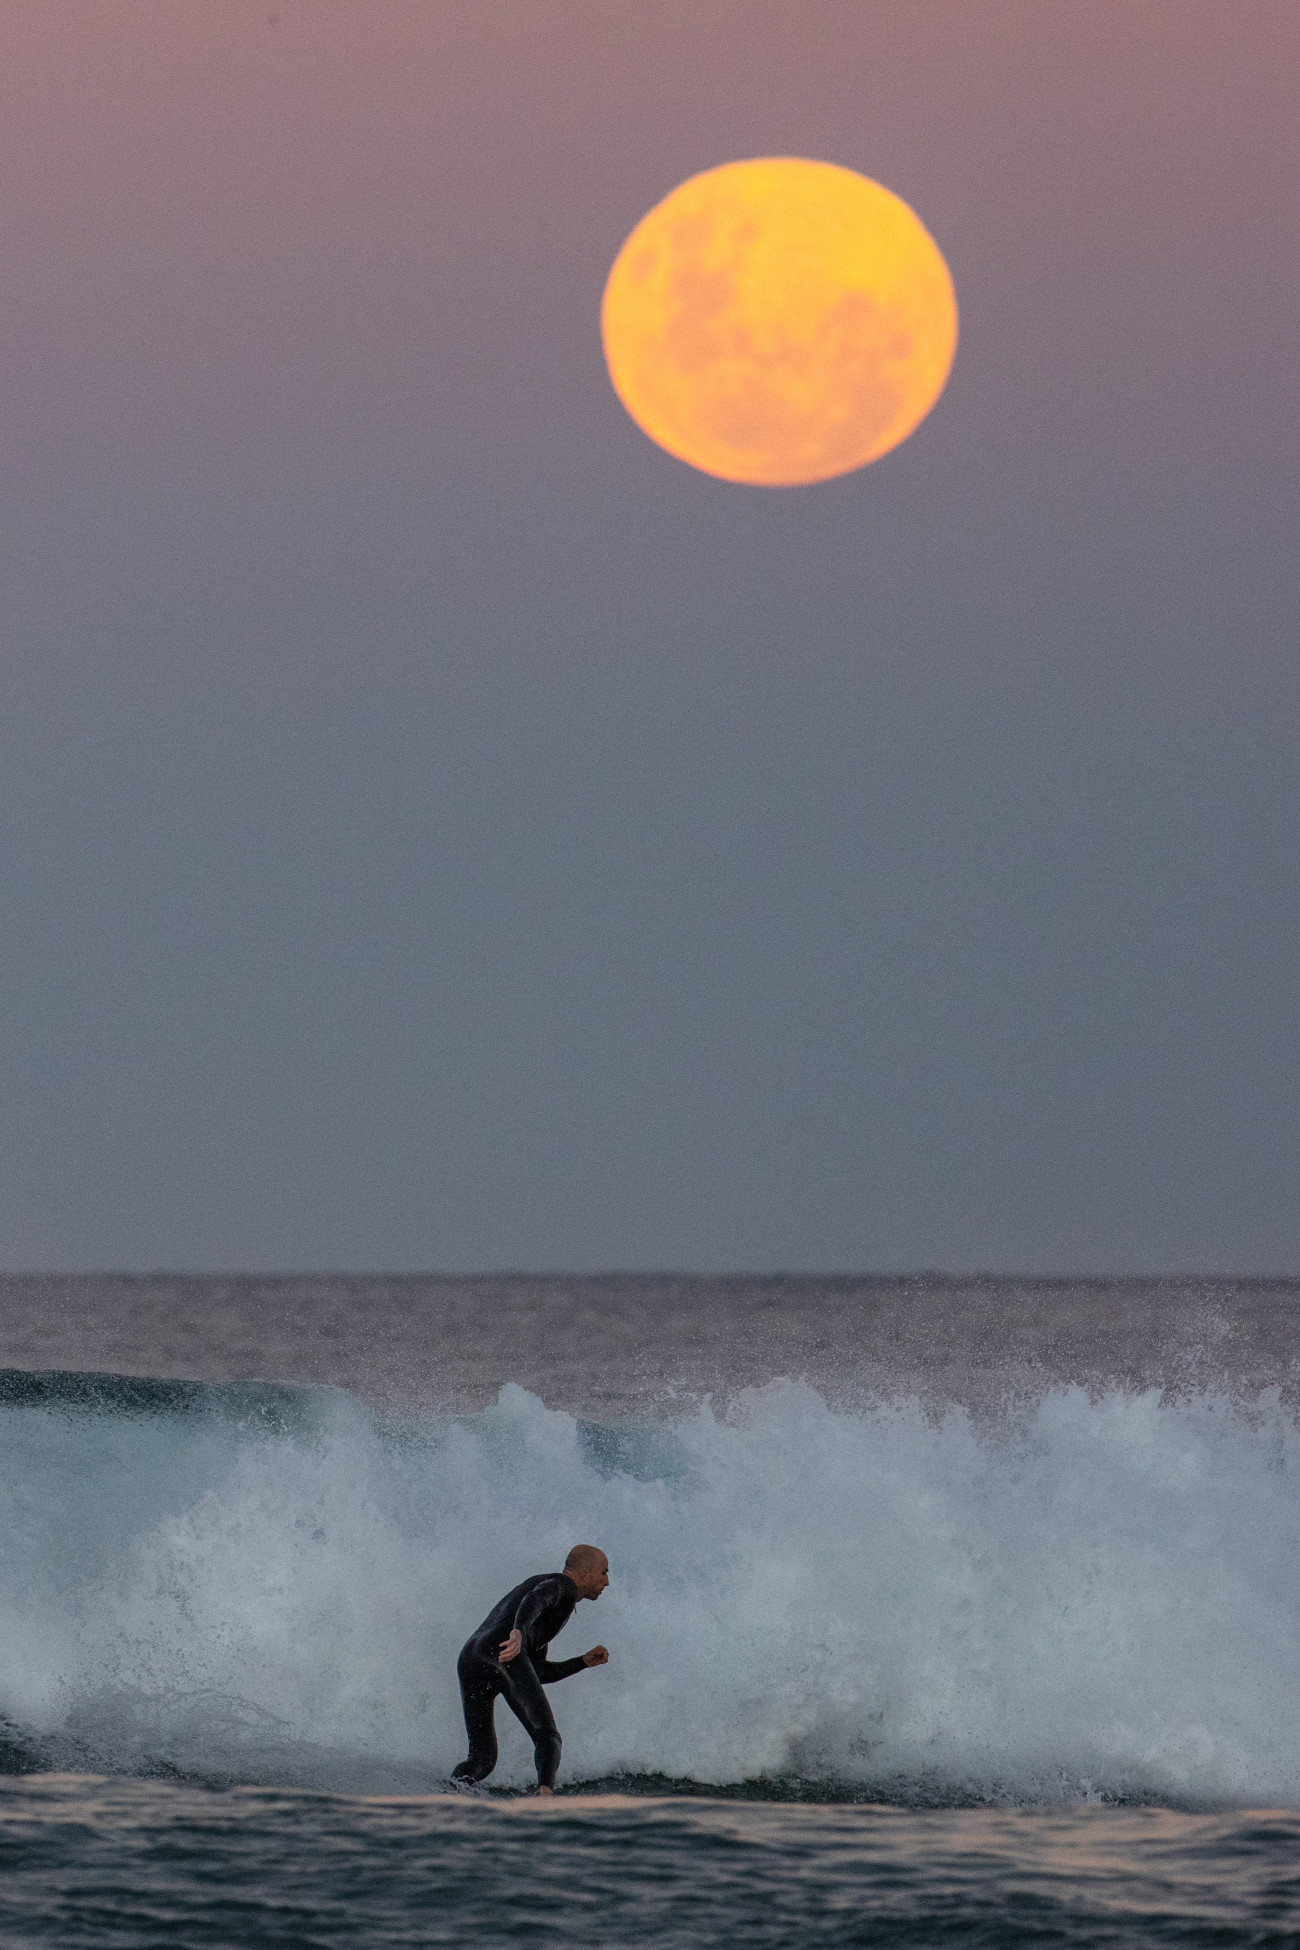 SYDNEY, AUSTRALIA - MAY 26: A surfer rides a wave as a super blood moon rises above the horizon at Manly Beach on May 26, 2021 in Sydney, Australia. It is the first total lunar eclipse in more than two years, which coincides with a supermoon.  A super moon is a name given to a full (or new) moon that occurs when the moon is in perigee - or closest to the earth - and it is the moon's proximity to earth that results in its brighter and bigger appearance. (Photo by Cameron Spencer/Getty Images)